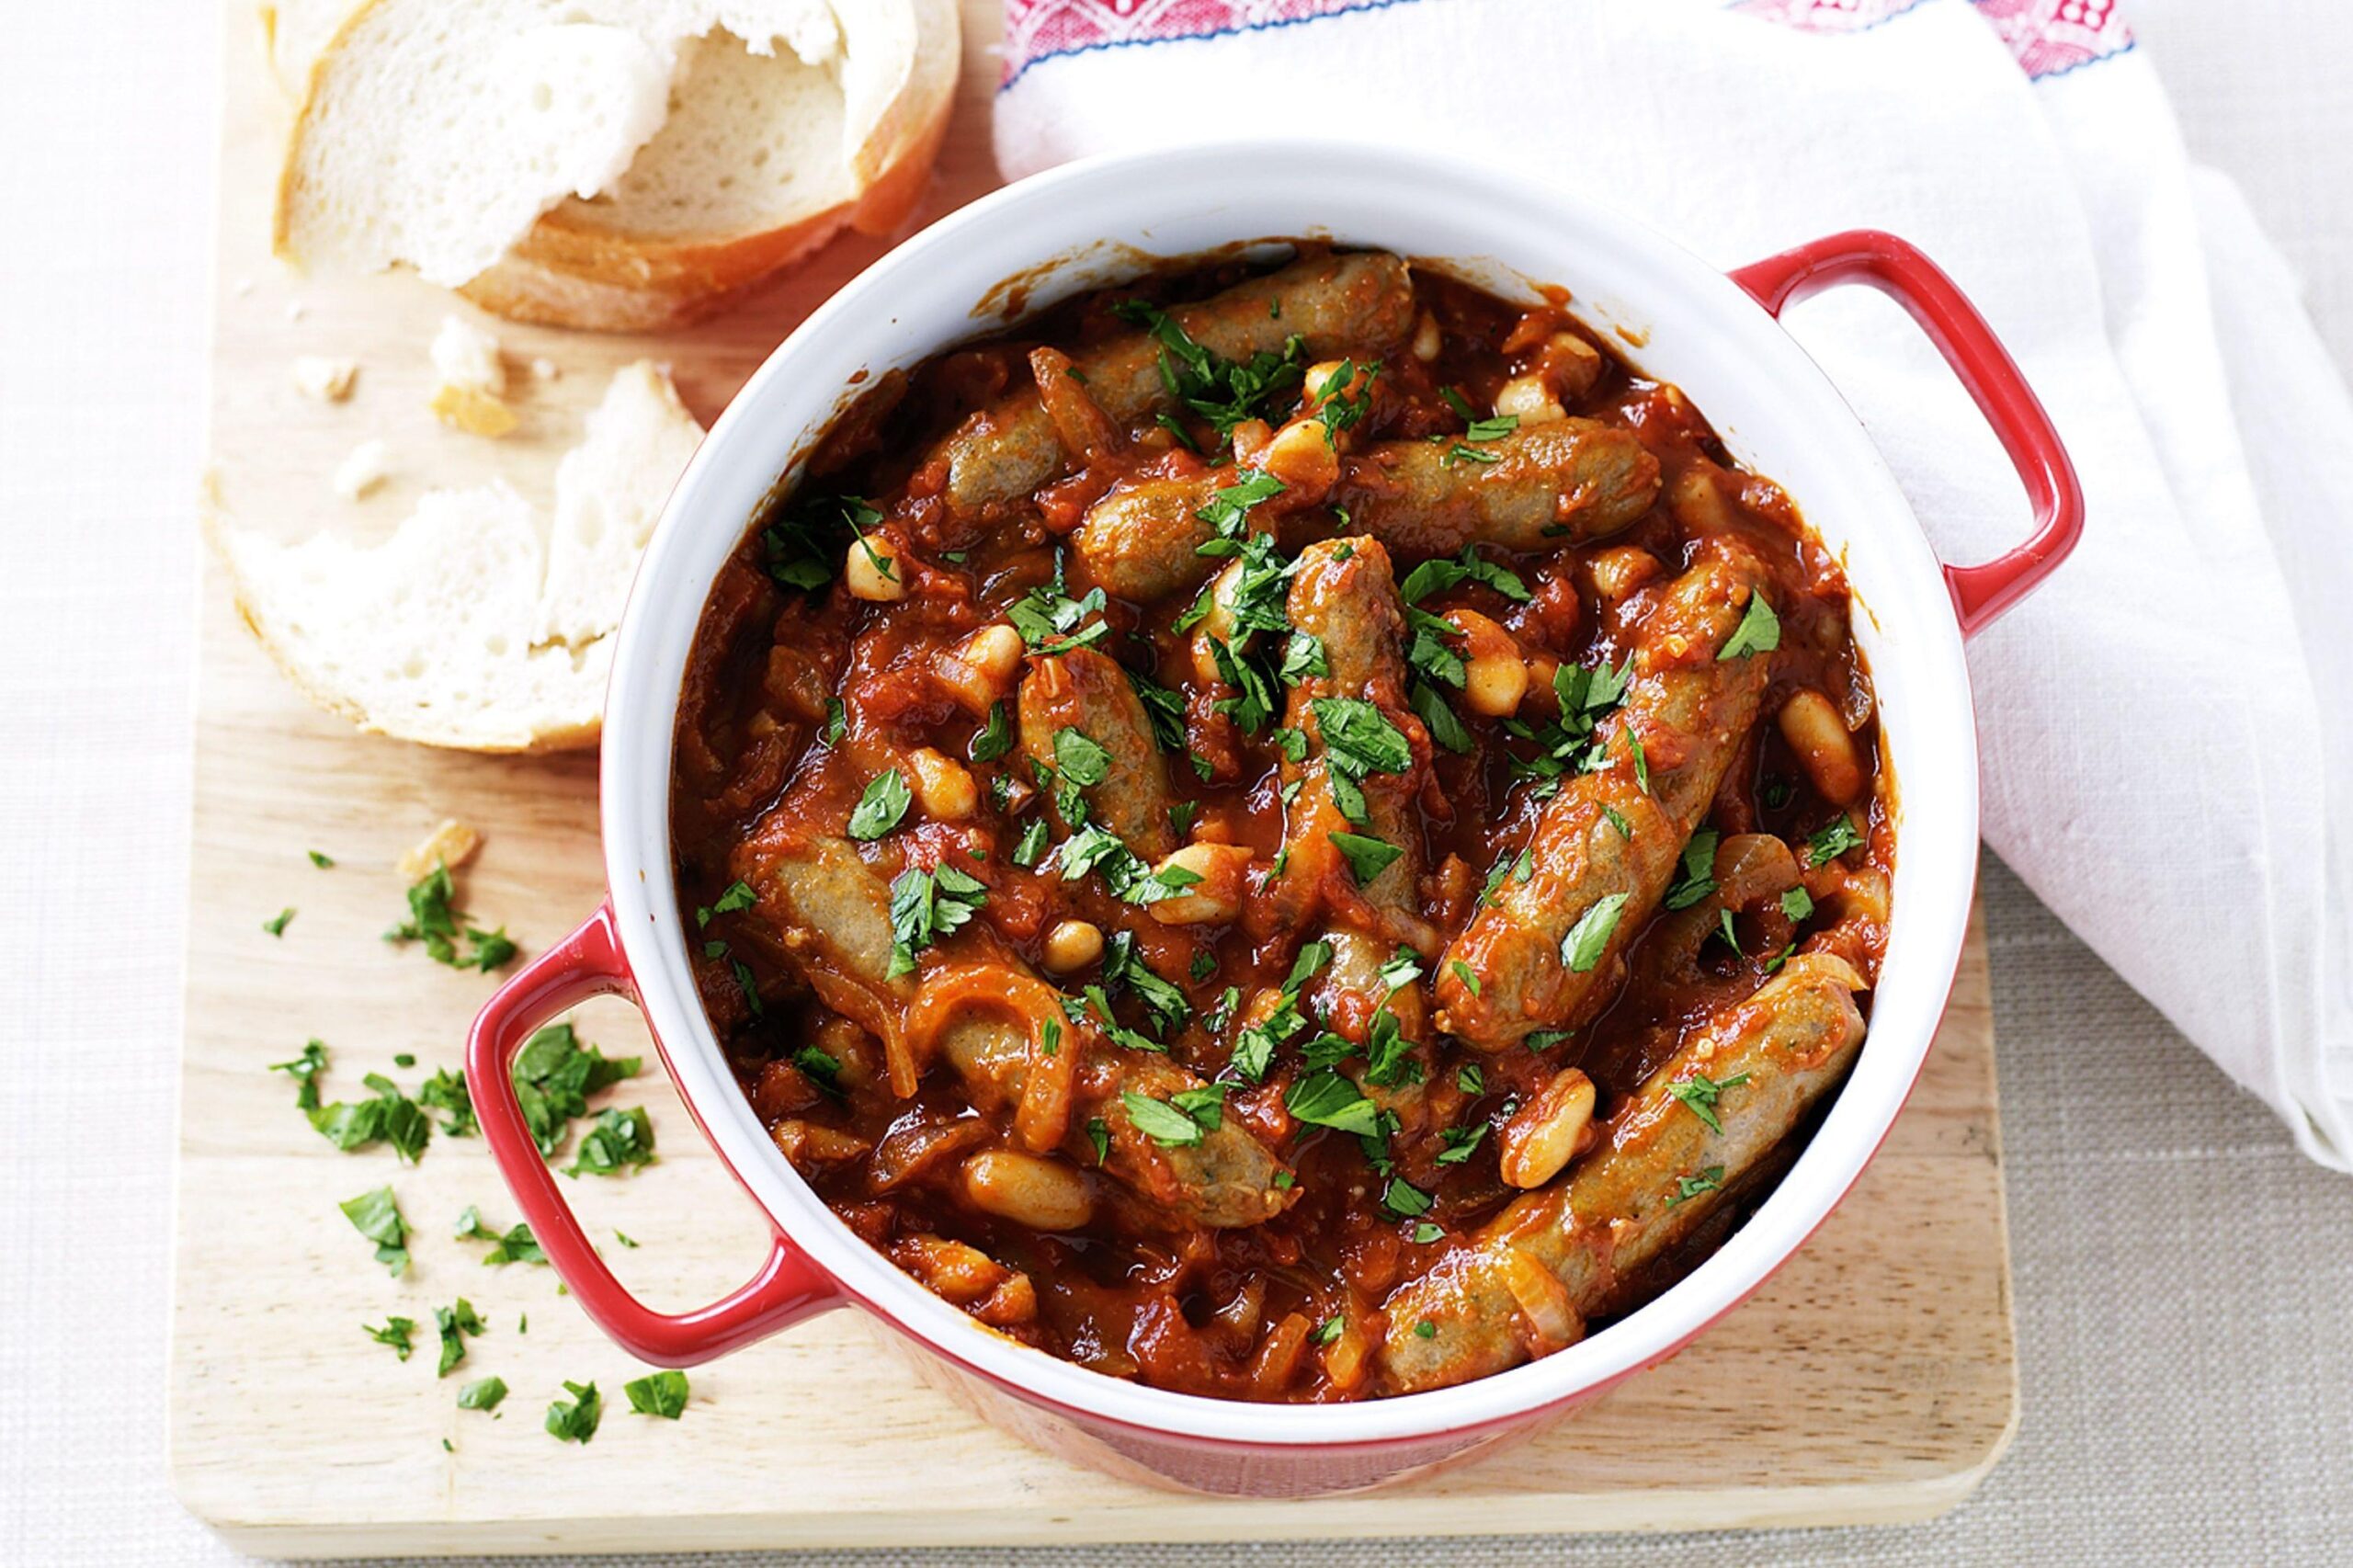 This curried sausage and bean hot pot will warm you up from the inside out